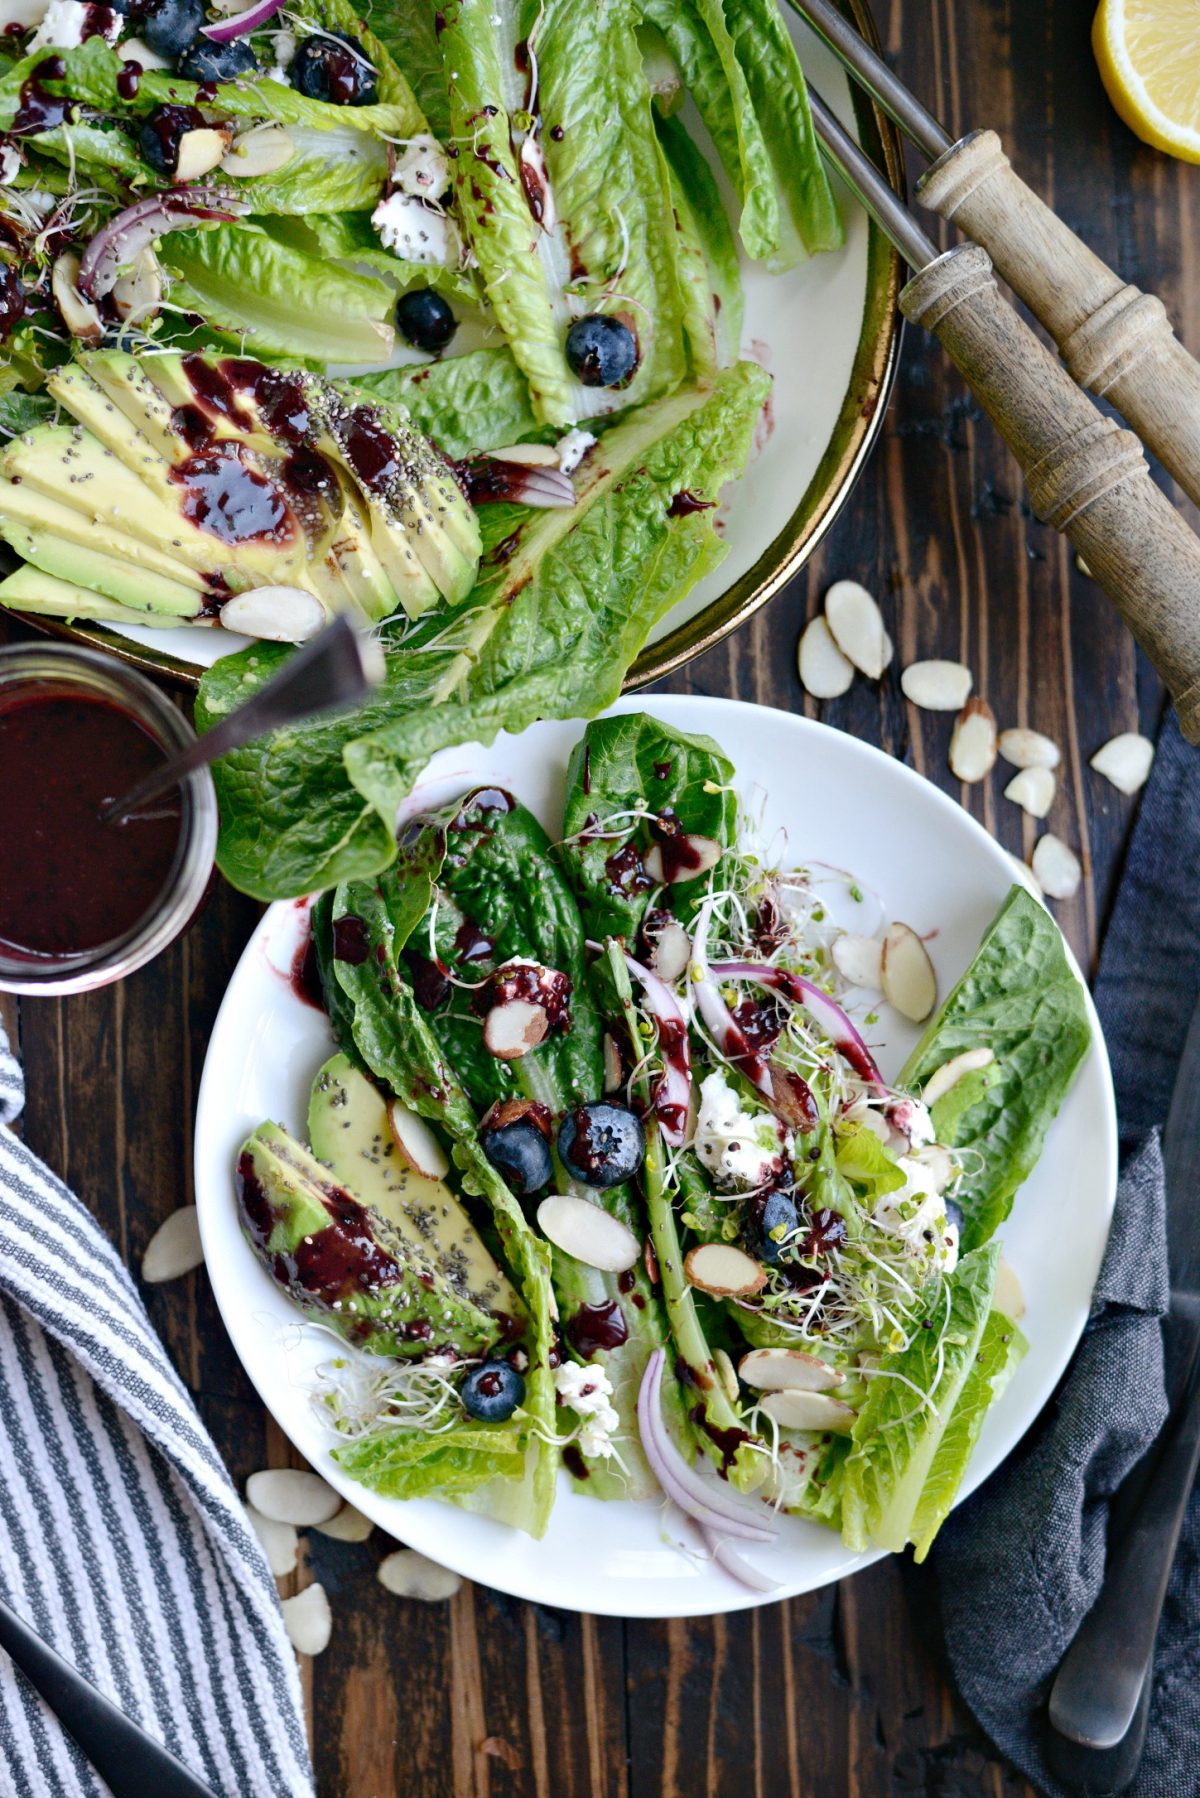 Blueberry Almond Salad with Goat Cheese, Avocado and Blueberry Balsamic Vinaigrette l SimplyScratch.com (10)